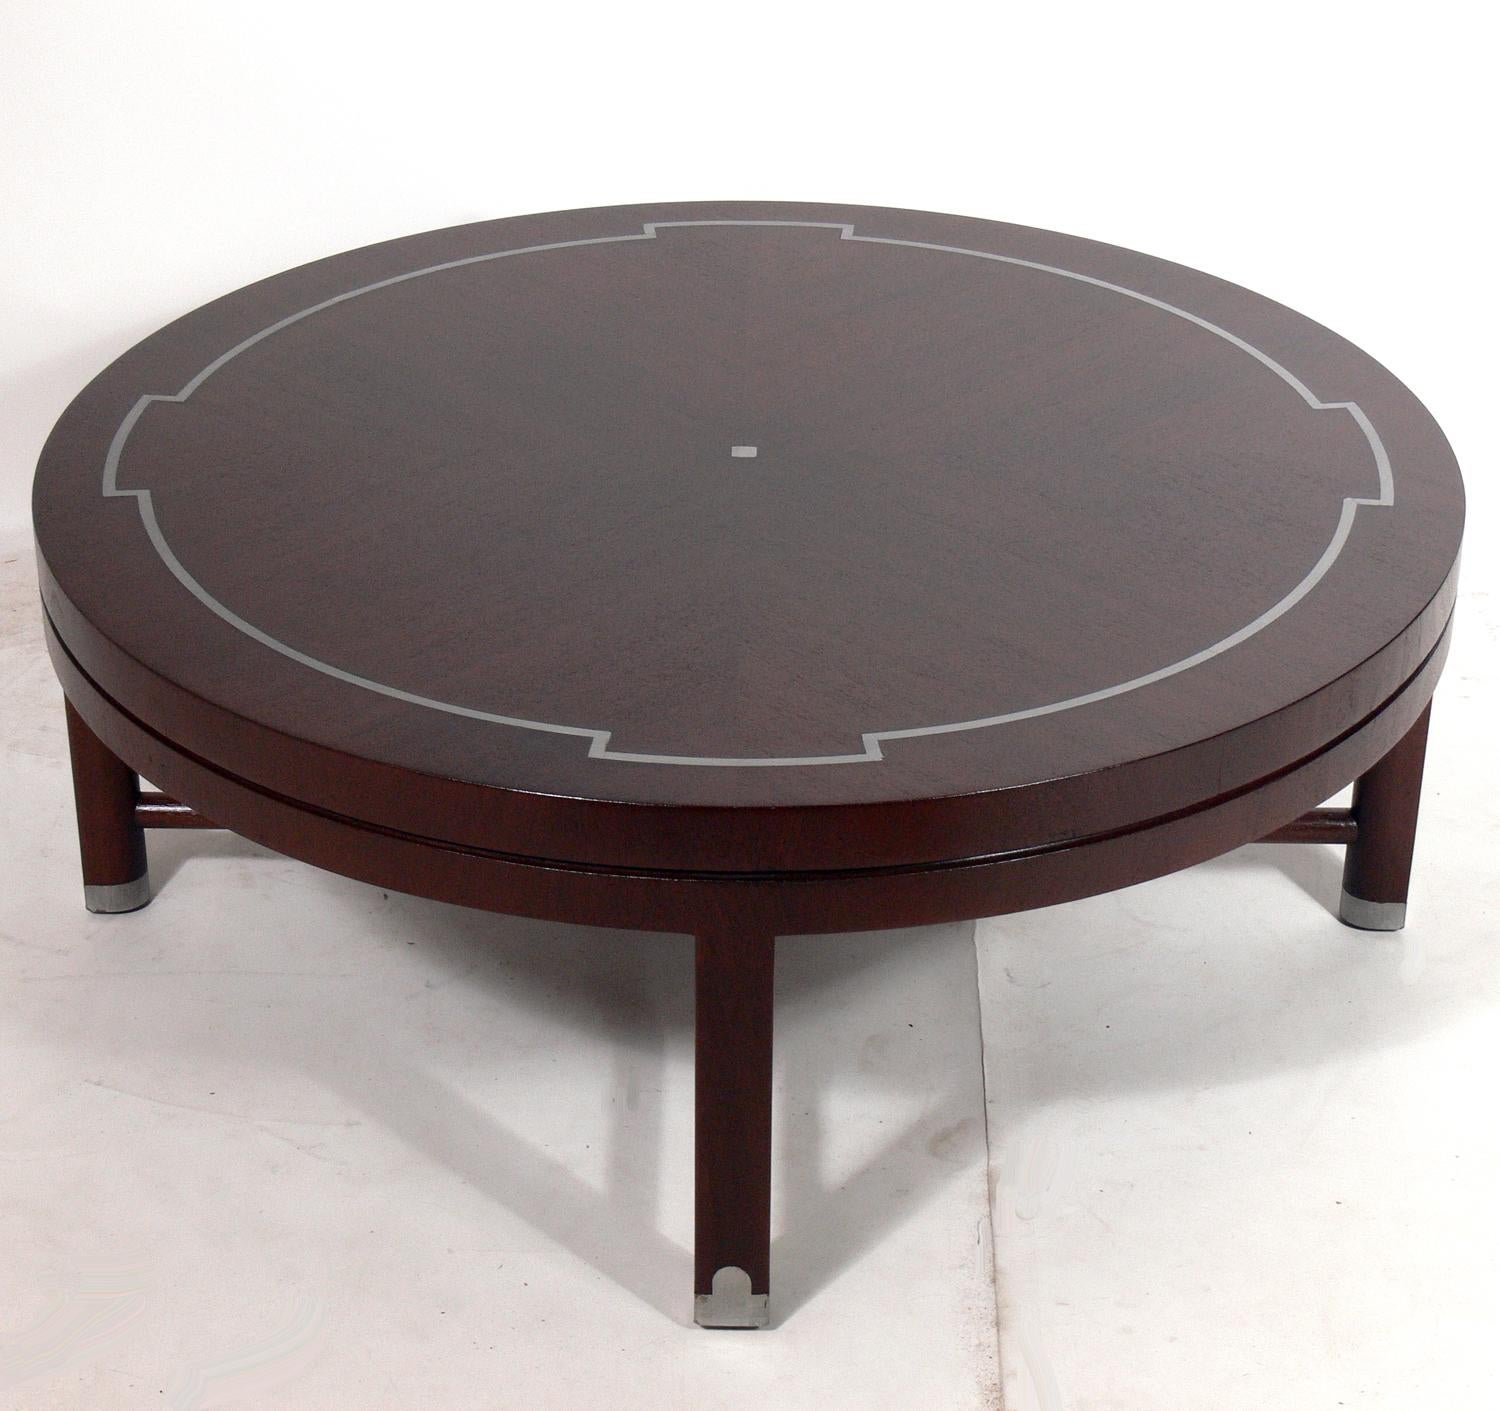 Elegant coffee table, designed by Tommi Parzinger, American, circa 1950s. It is constructed of mahogany and inlaid pewter. It has been refinished in a deep medium brown color.